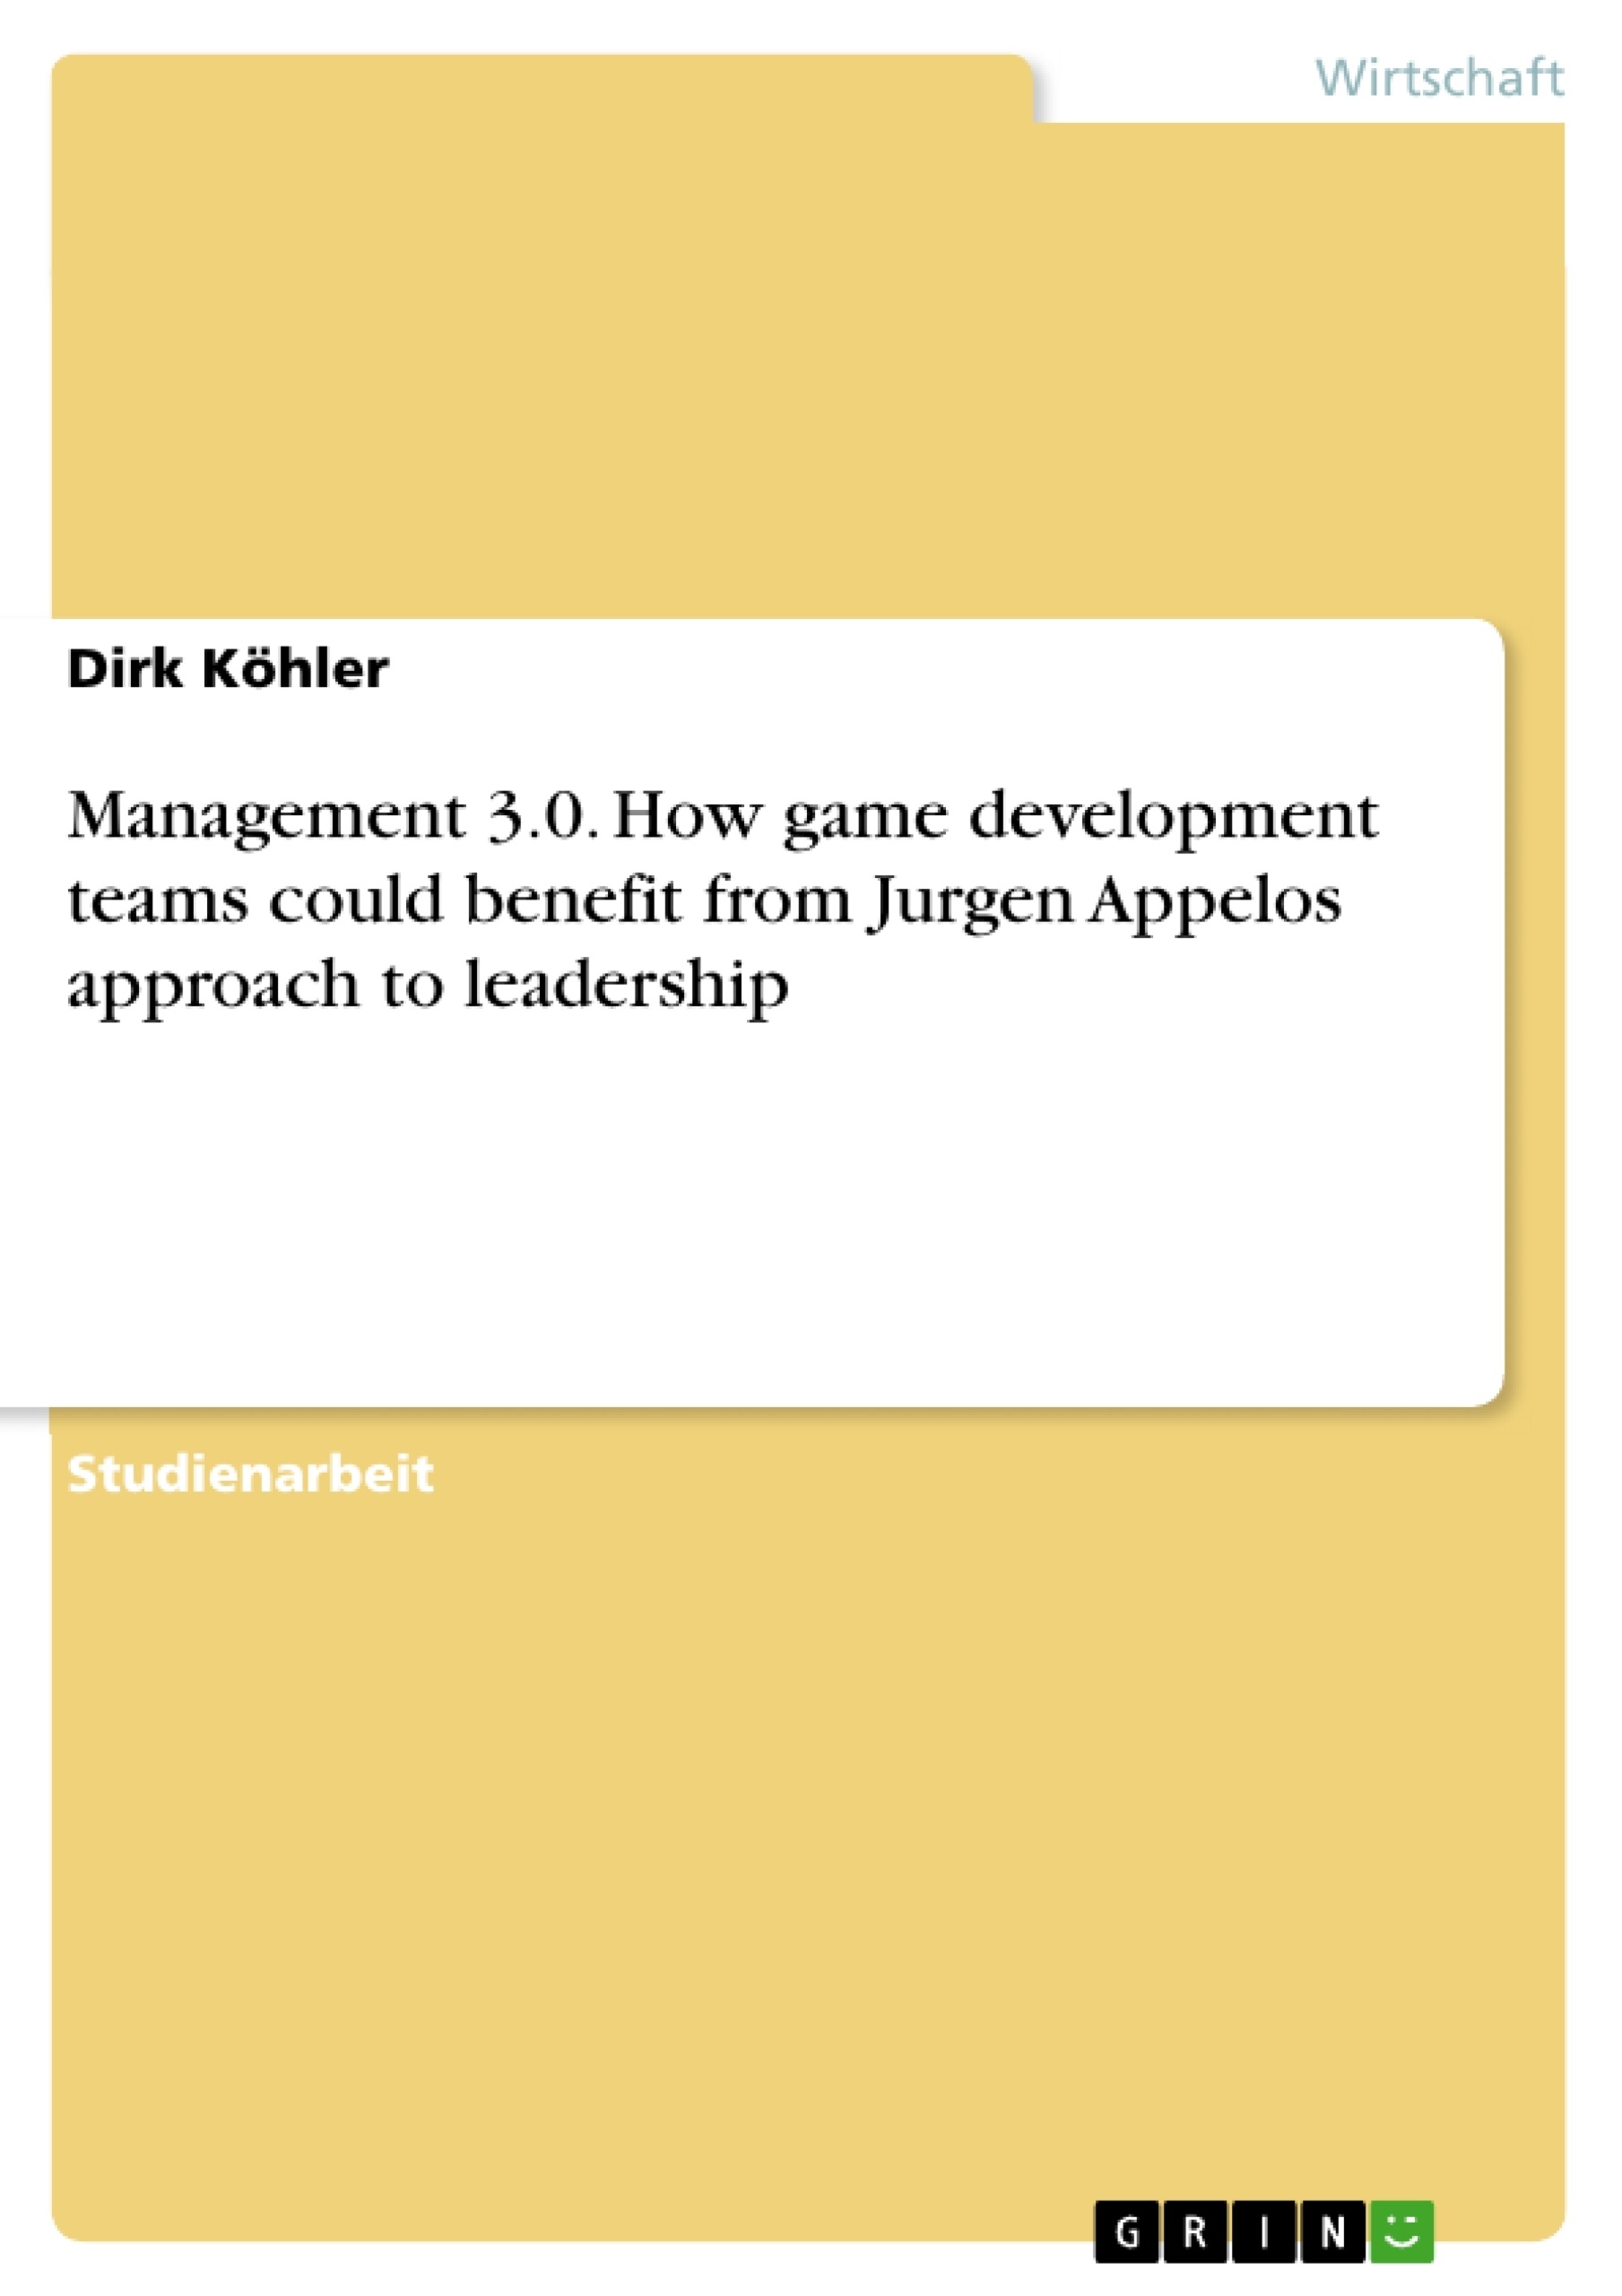 Titre: Management 3.0. How game development teams could benefit from Jurgen Appelos approach to leadership